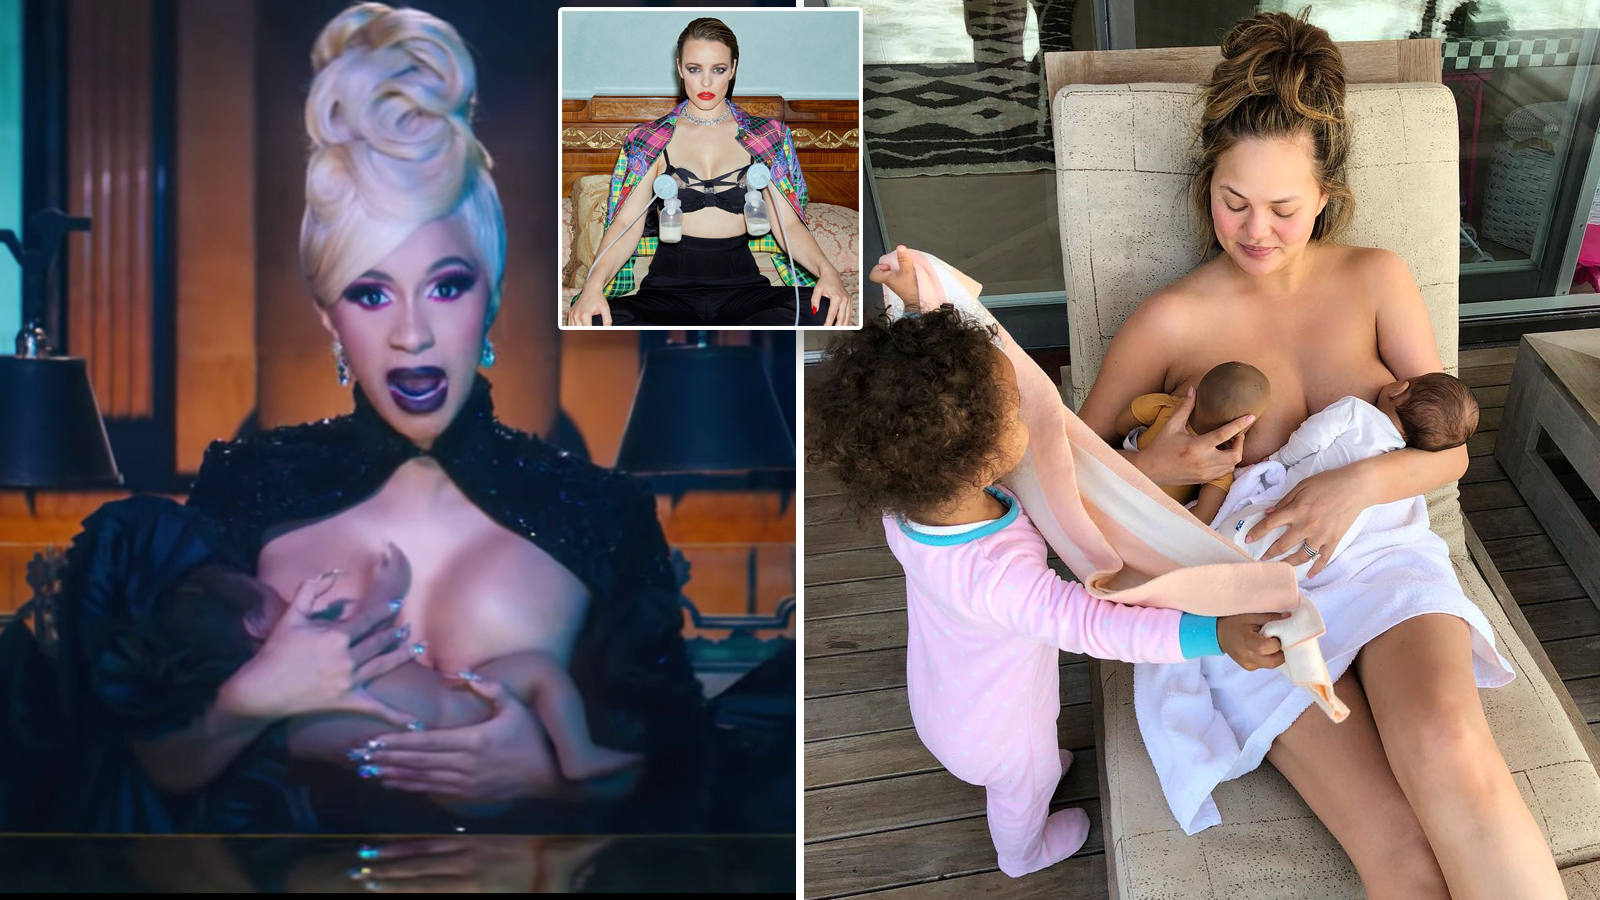 Huge Tits Lactating Caption - Breastfeeding Celebrities: Famous Moms Get Real on Instagram